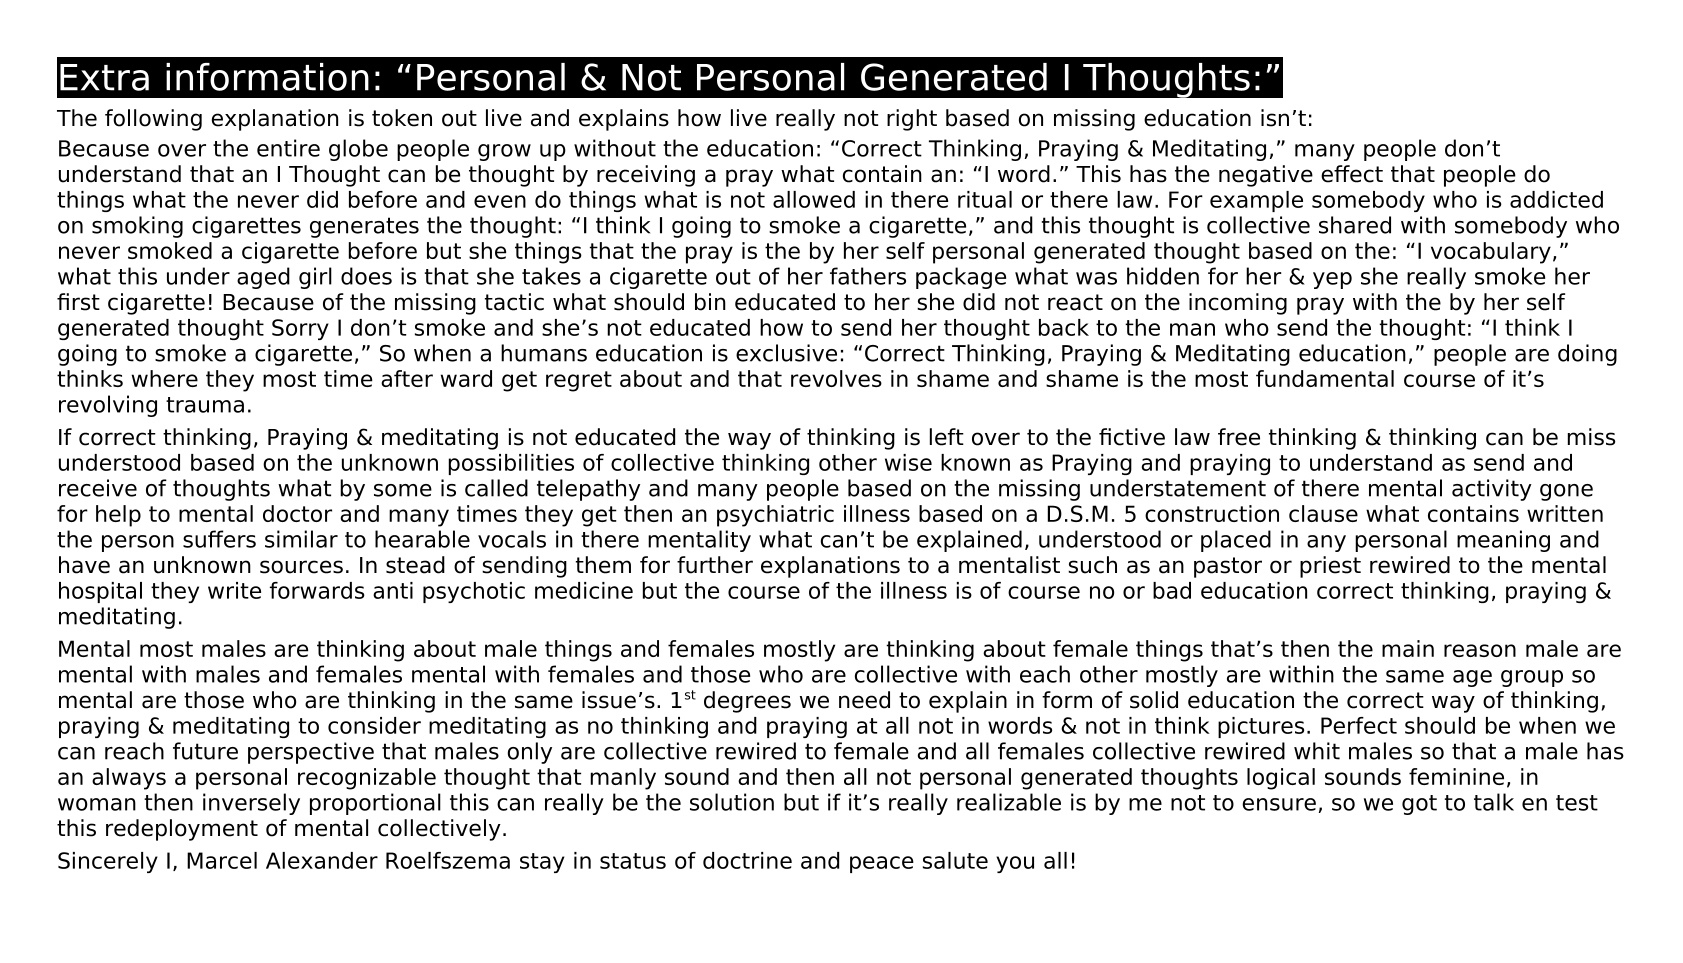 Extra information - Personal & Not Personal Generated I Thoughts